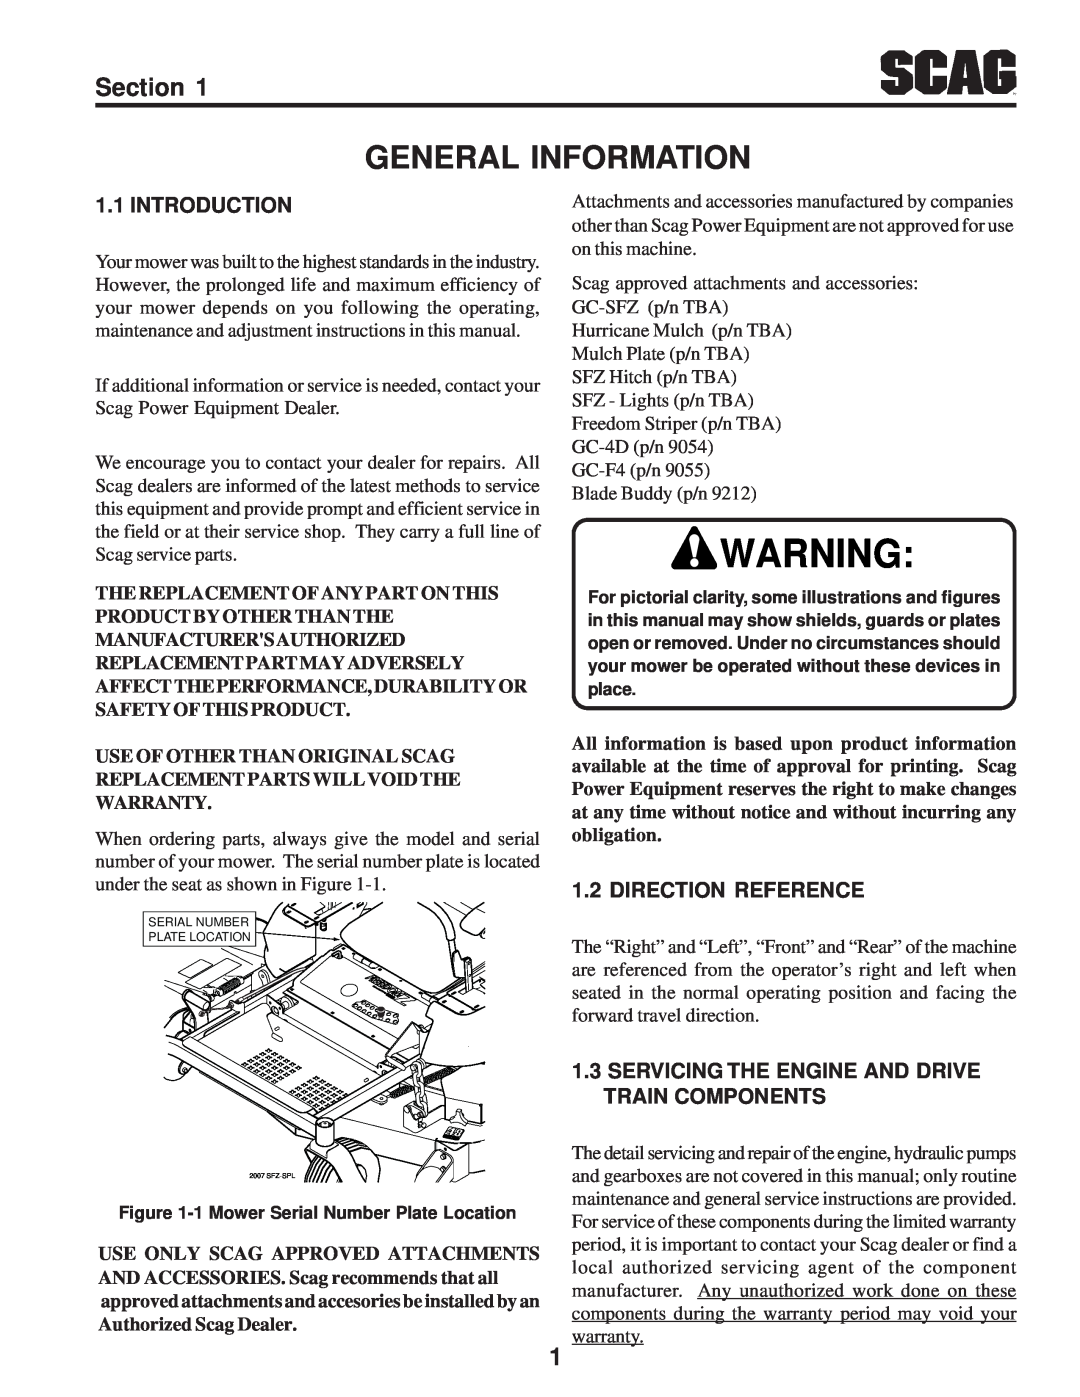 Scag Power Equipment SFZ manual General Information, Section, Introduction, Direction Reference 